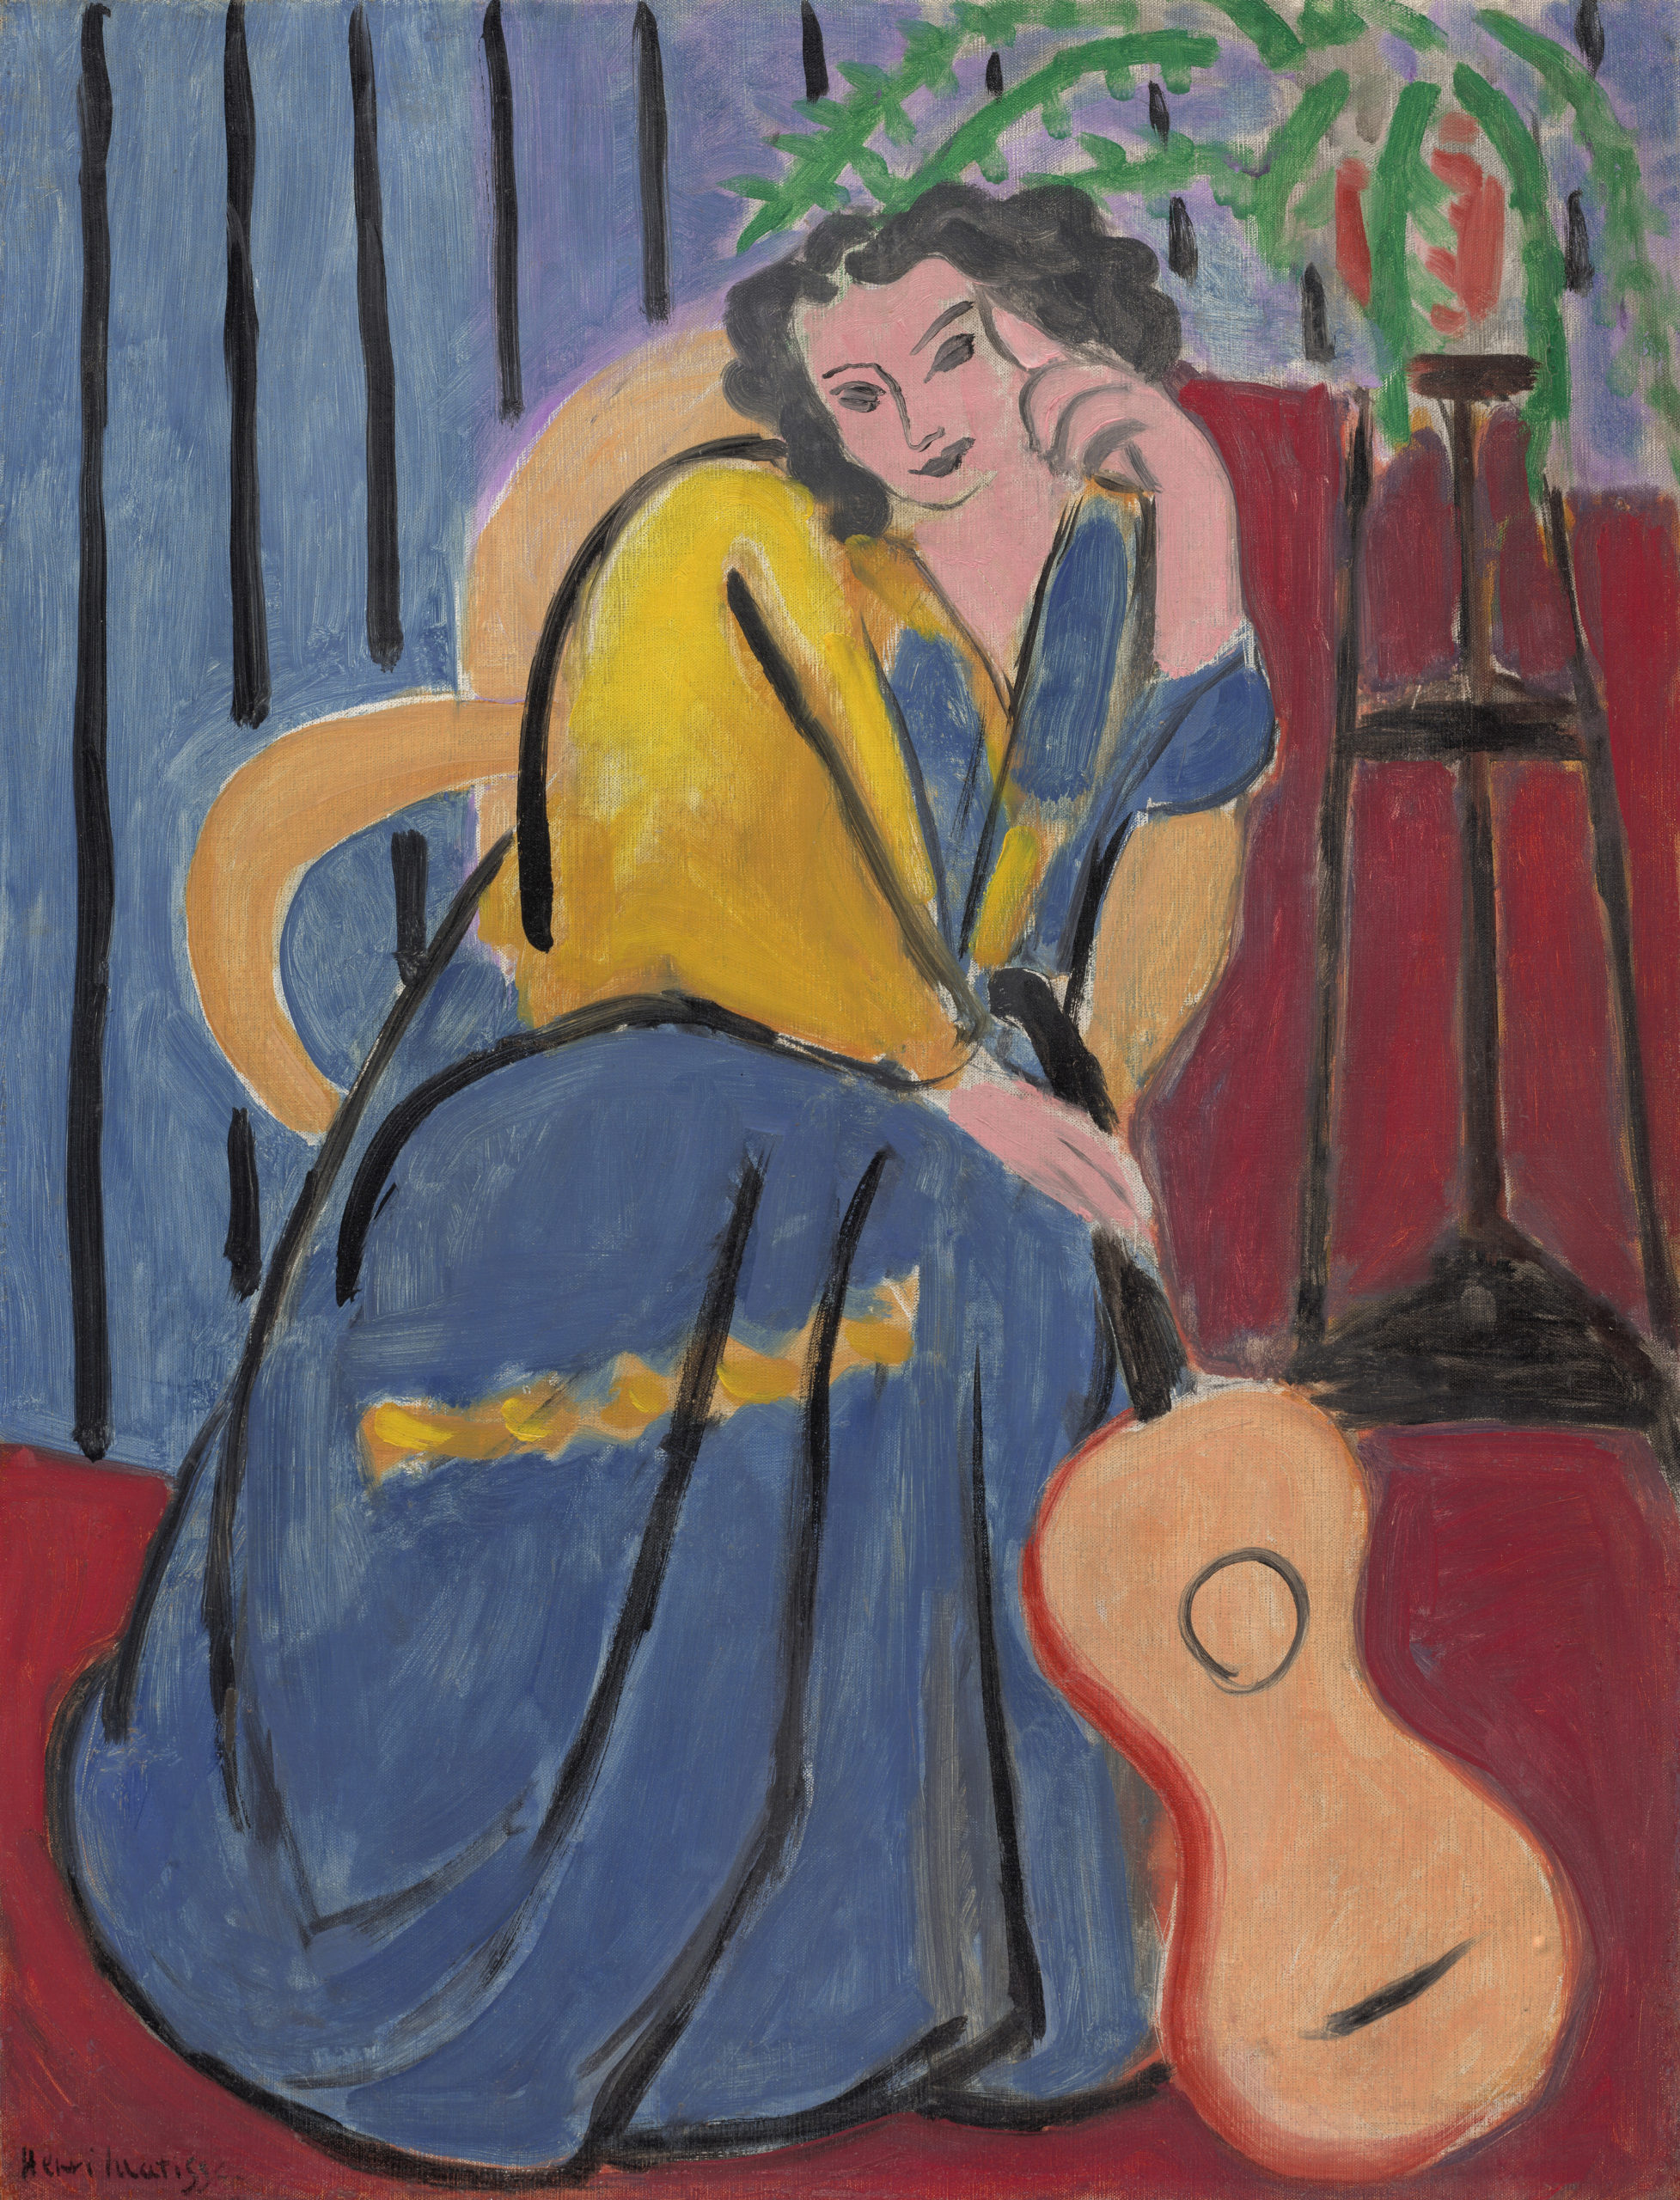 Matisse, Girl in Yellow and Blue with Guitar-Press Image - 3000px W (300dpi)